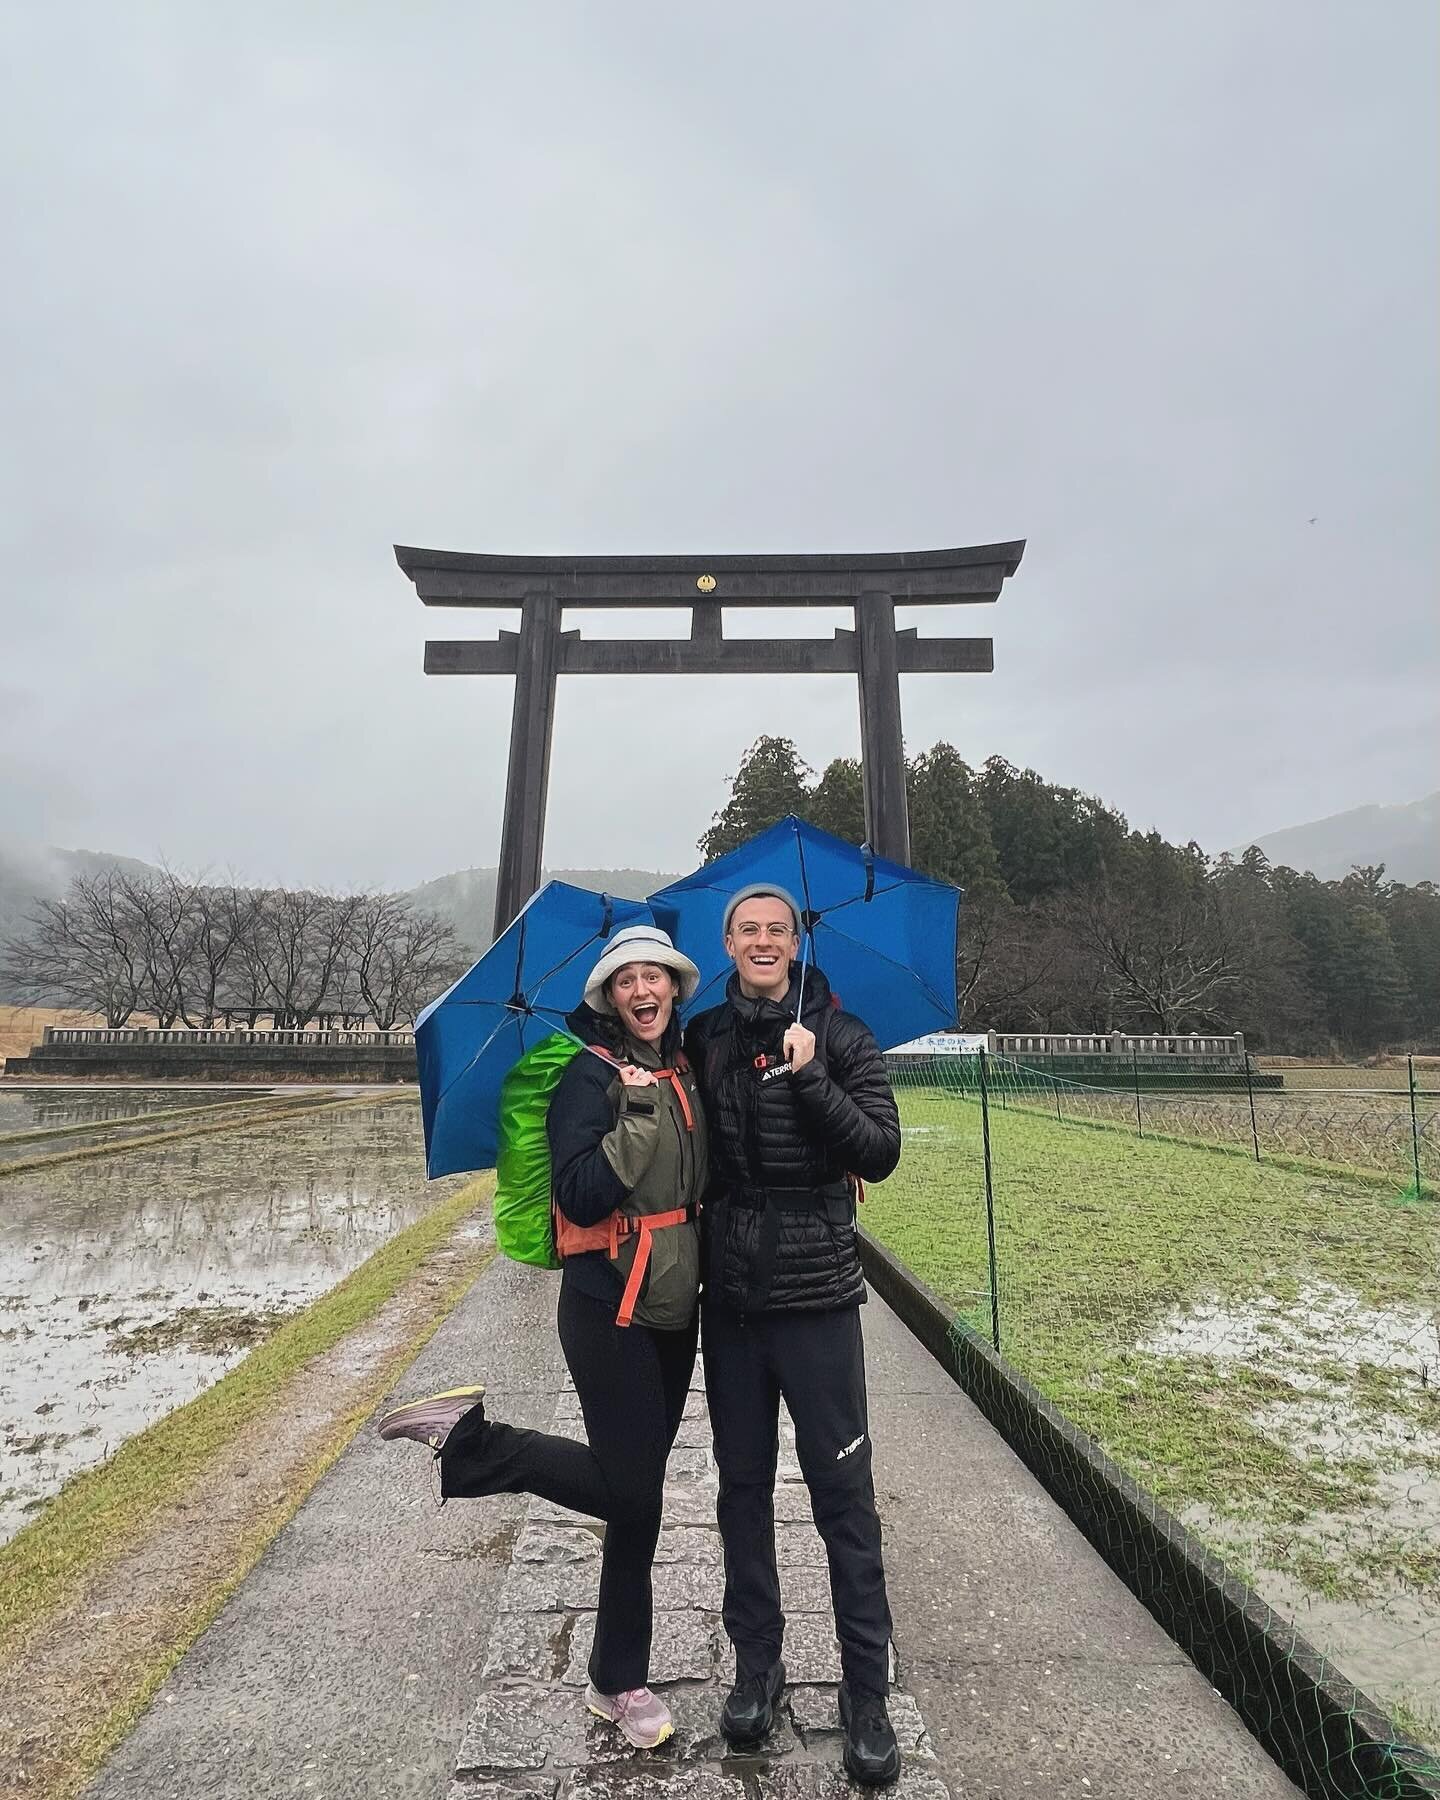 Starting our 4 day Pilgrimage through the mountains of Wakayama - at the largest Torii gate in Japan! ⛩️

The ancient Kumano Kodo Trails aka &lsquo;The land of the Gods&rsquo; have been walked by Buddhist monks &amp; other pilgrims for over 1000 year